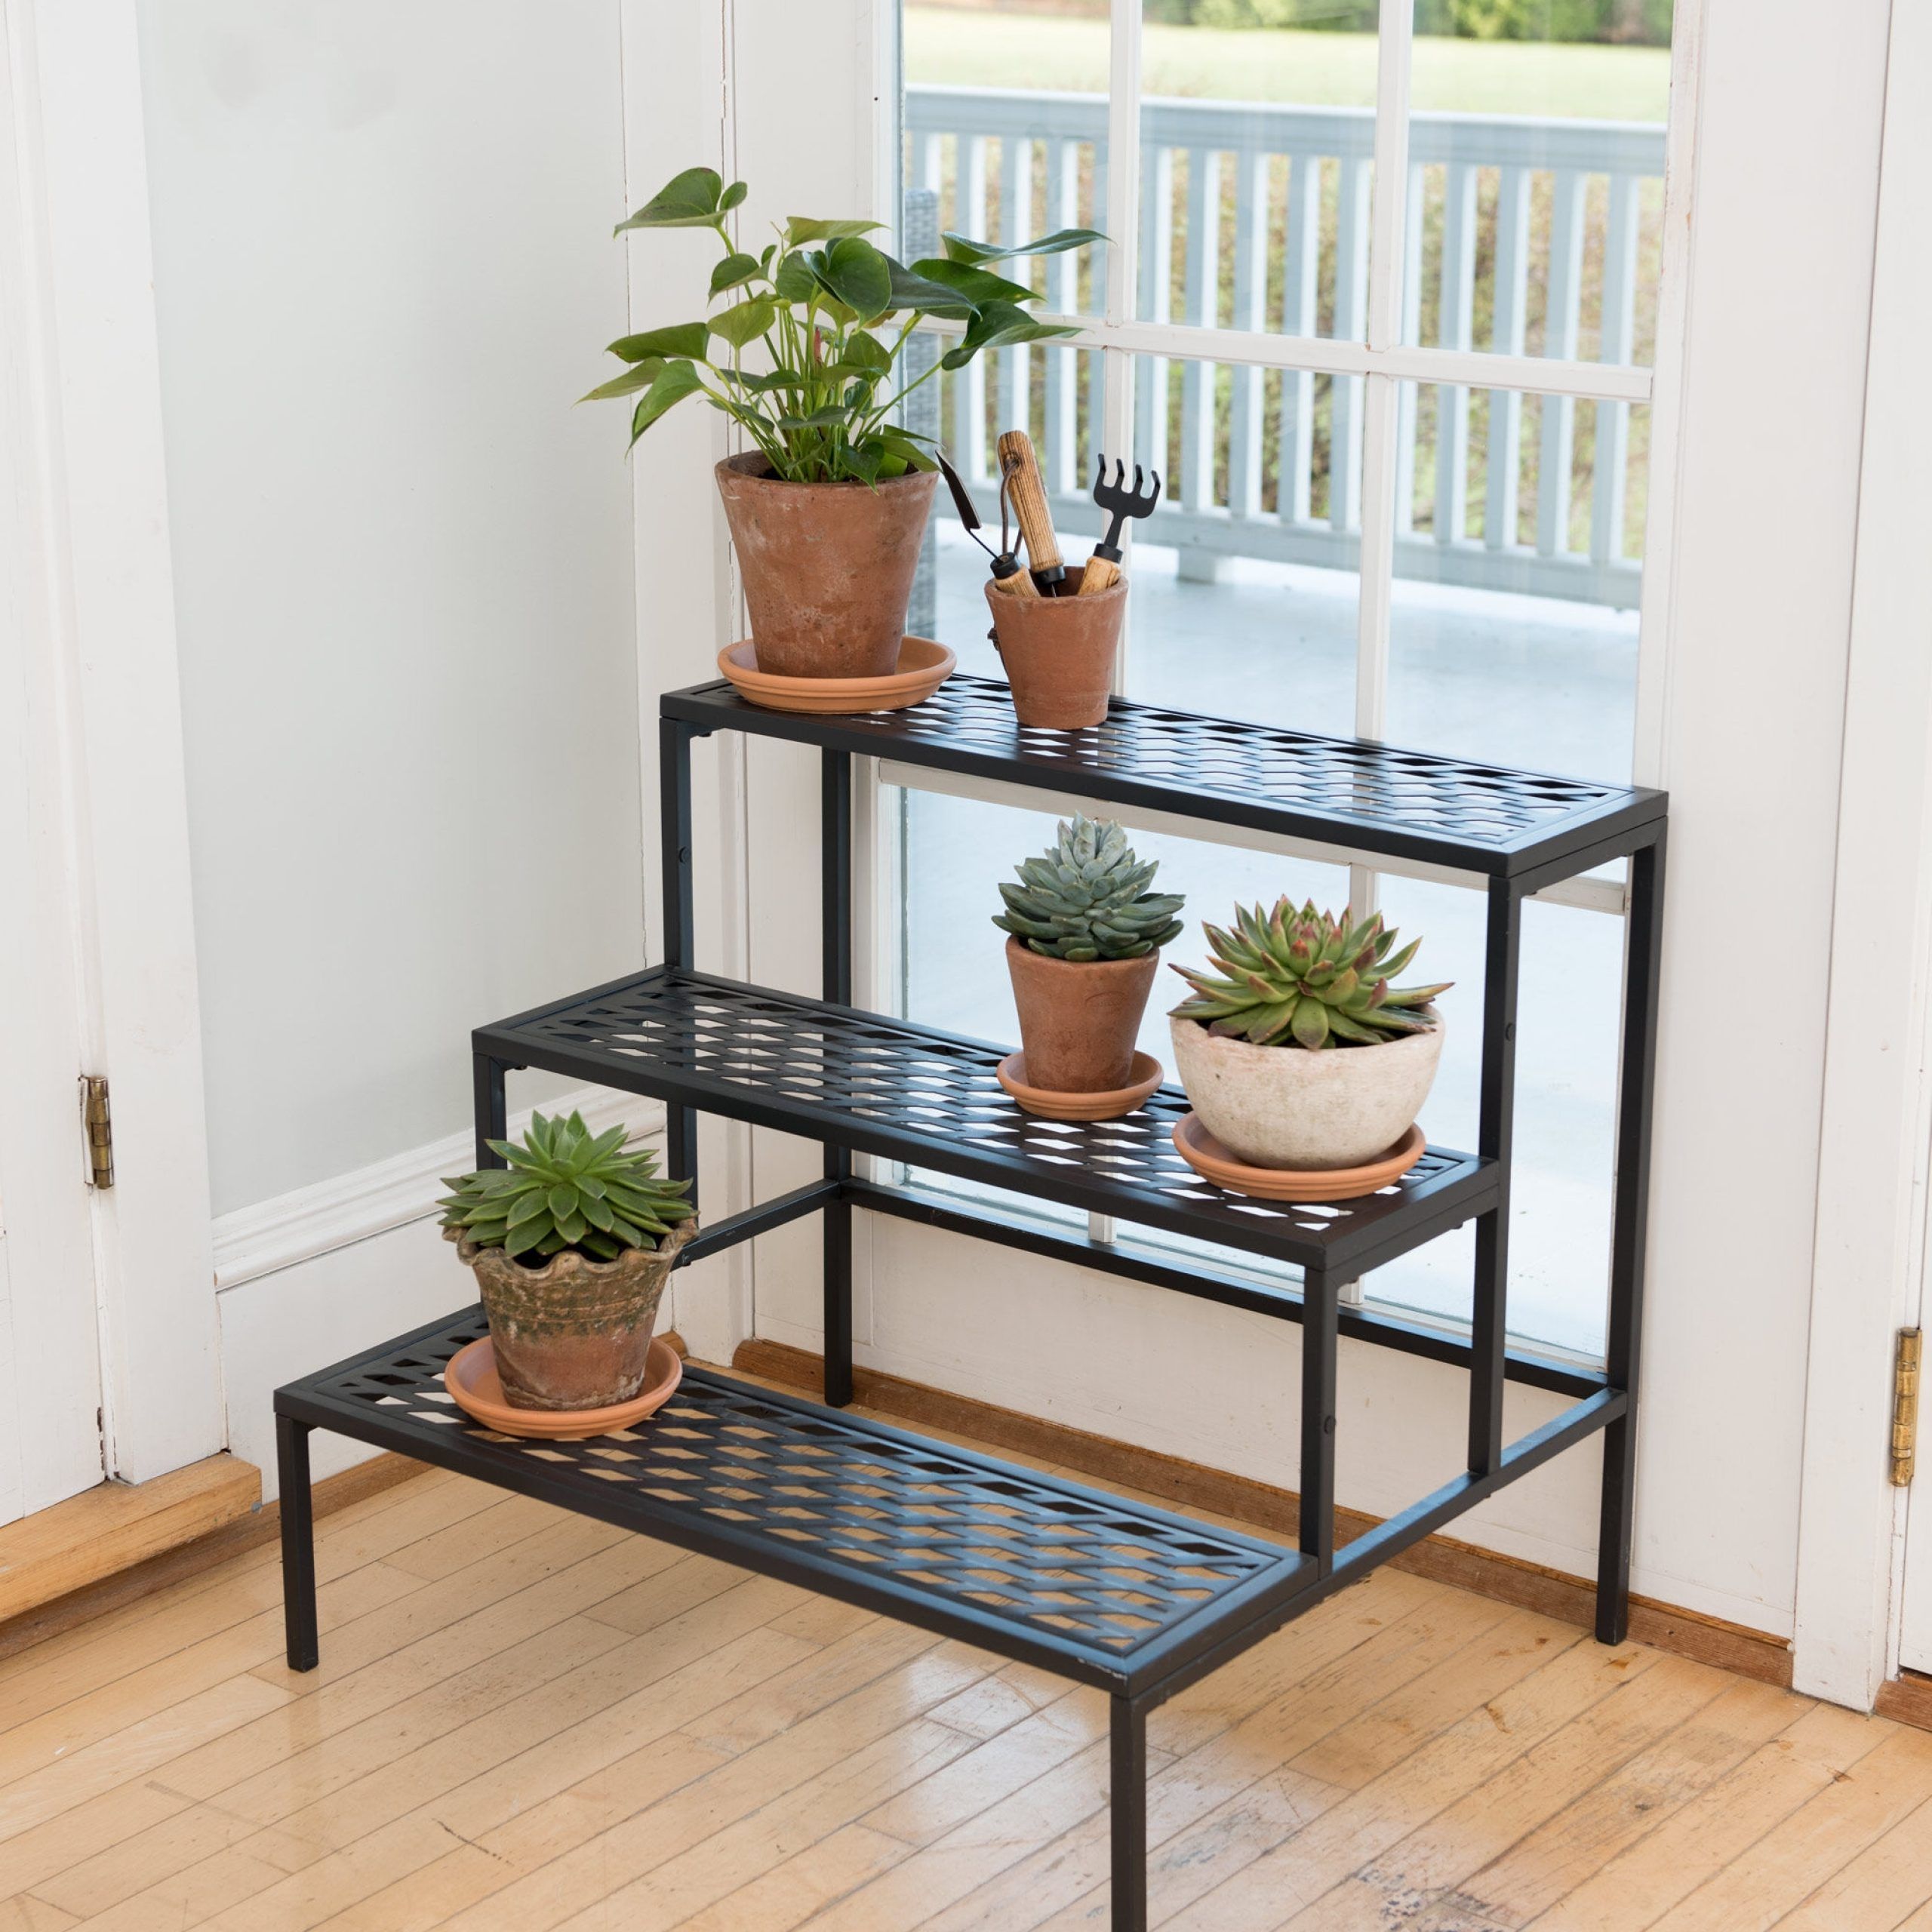 Gardener's Supply Pertaining To Fashionable Three Tiered Plant Stands (View 2 of 15)